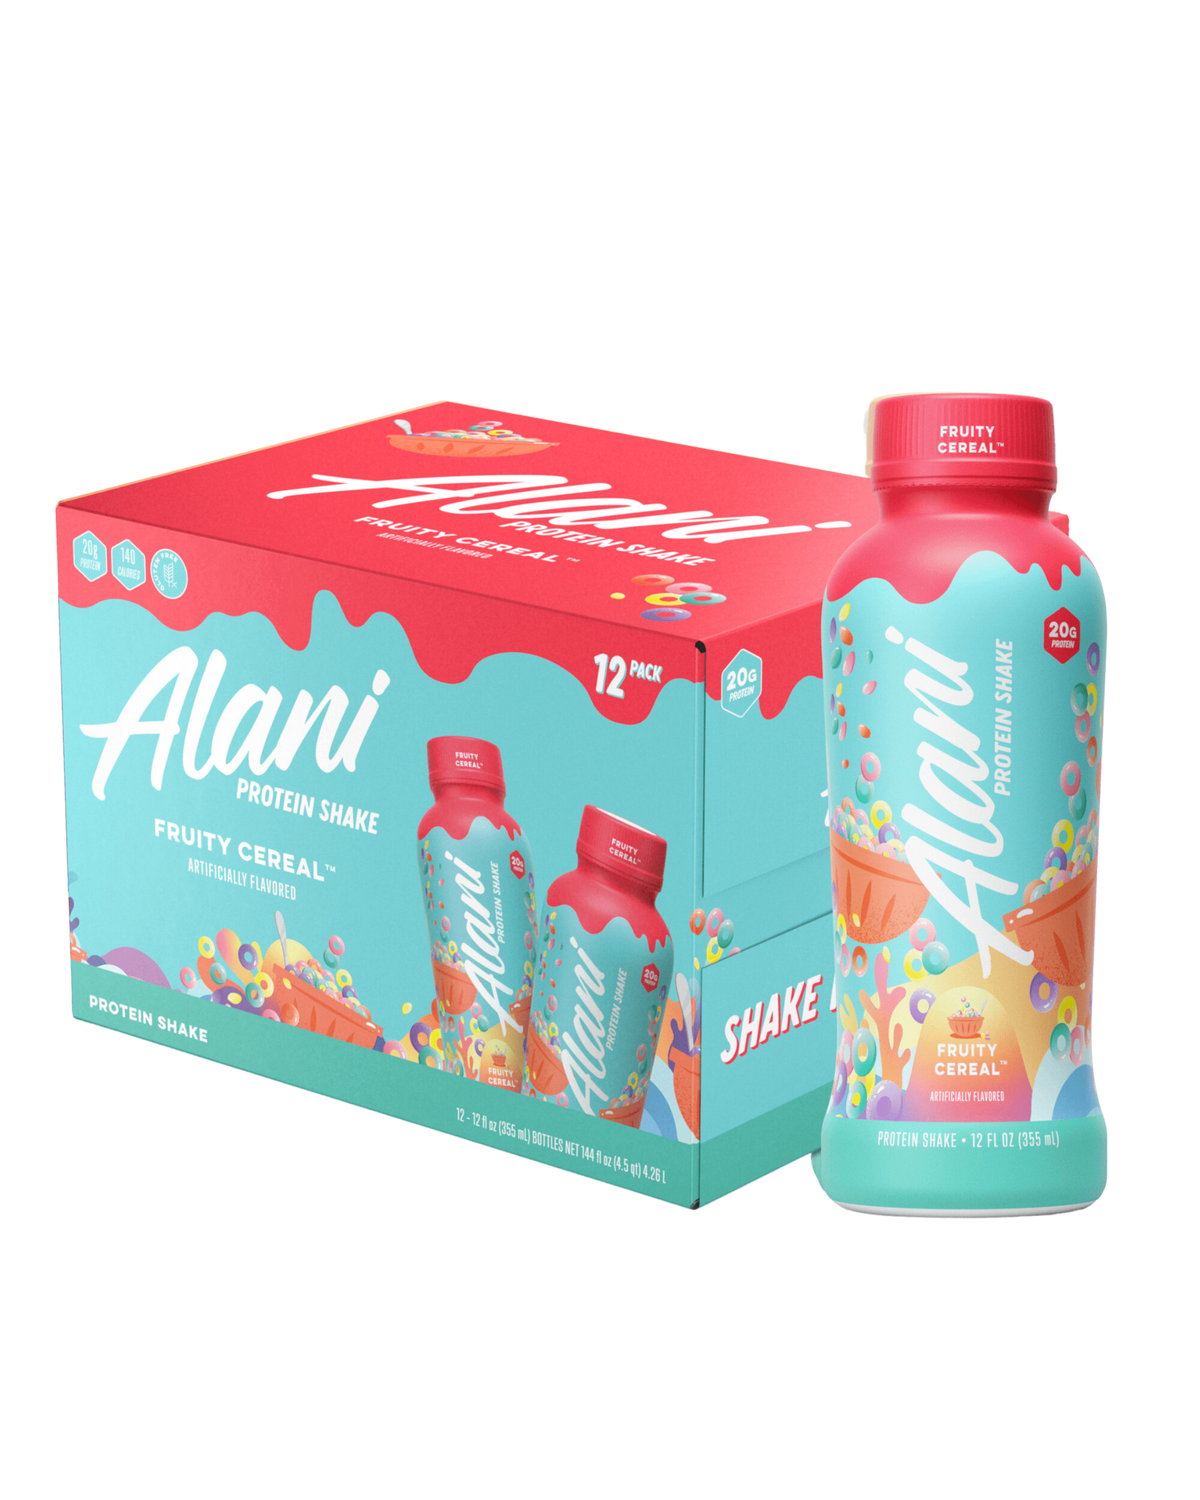 A 12pk box of Alani Nu Protein Shake - Fruity Cereal.